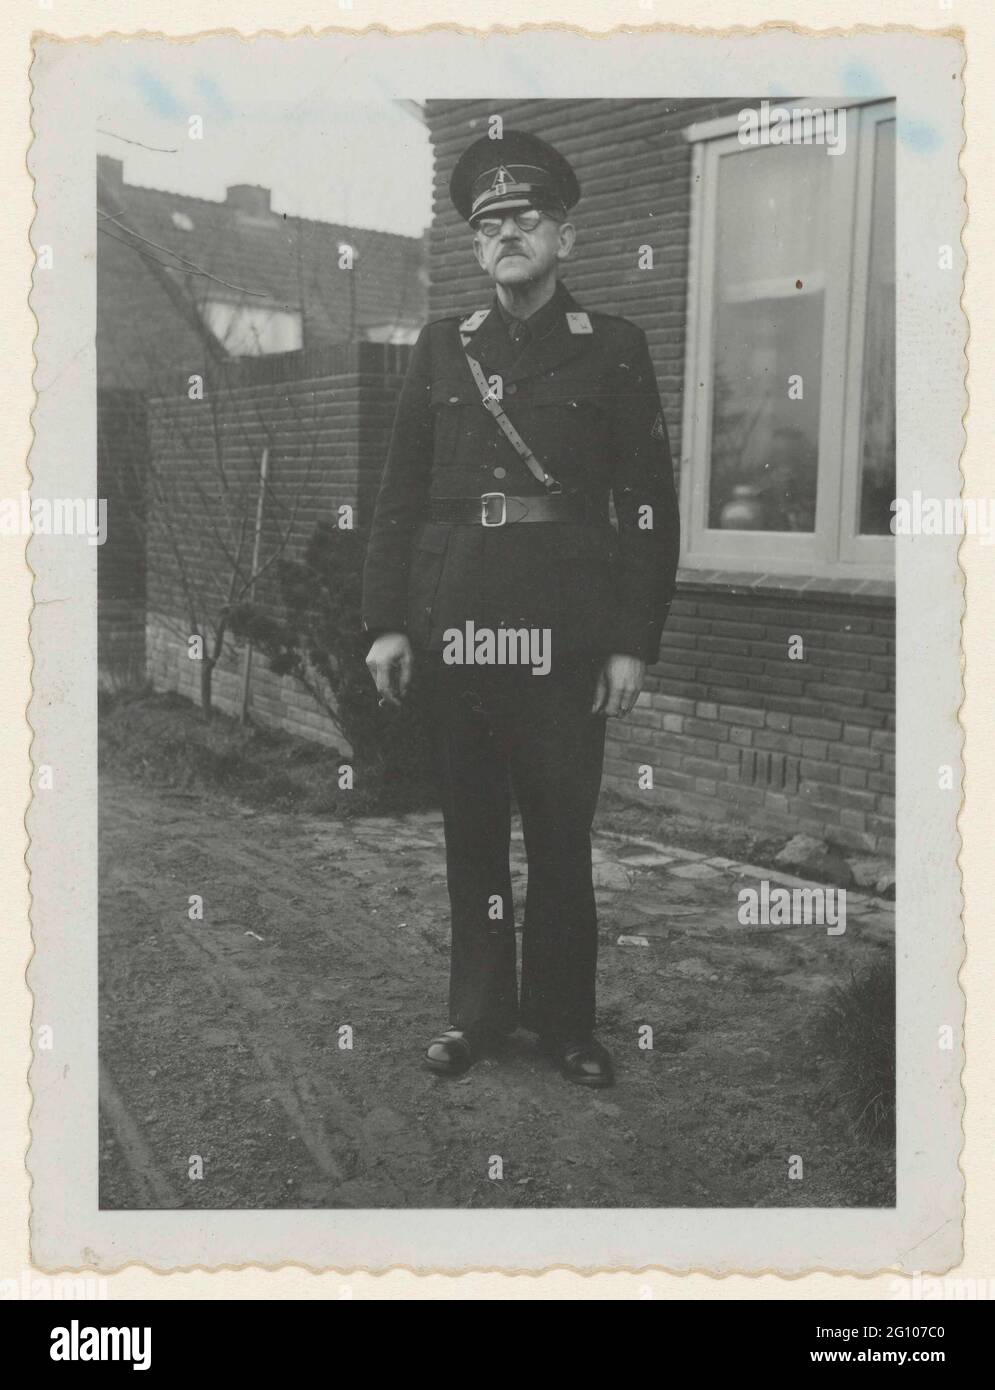 Portrait of a member of the WA; NSB. Portrait of a member of the WA. Fut out, standing in front of a house. On his collar a distinctive with two stars: companion, the lower frame. Hat with the Wolfsangel, on his left sleeve. The triangular emblem of the NSB. Belt diagonally over the chest. It is an older man with glasses and mustache. The inscription on the back mentions that it is a member of the country guard, founded at the end of 1943. Stock Photo